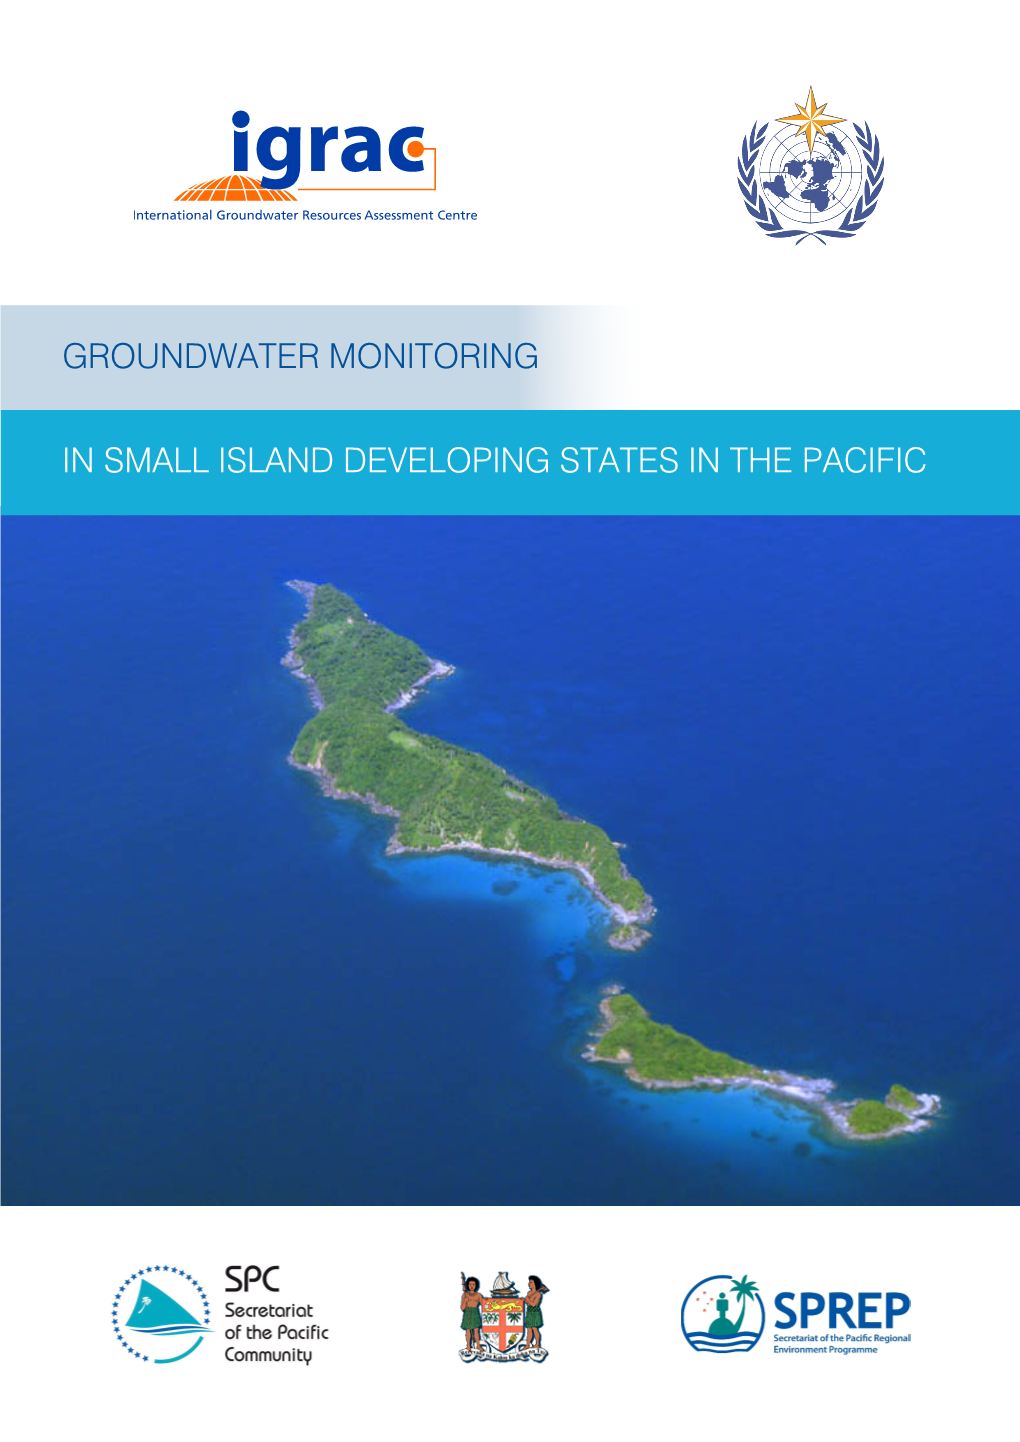 In Small Island Developing States in the Pacific